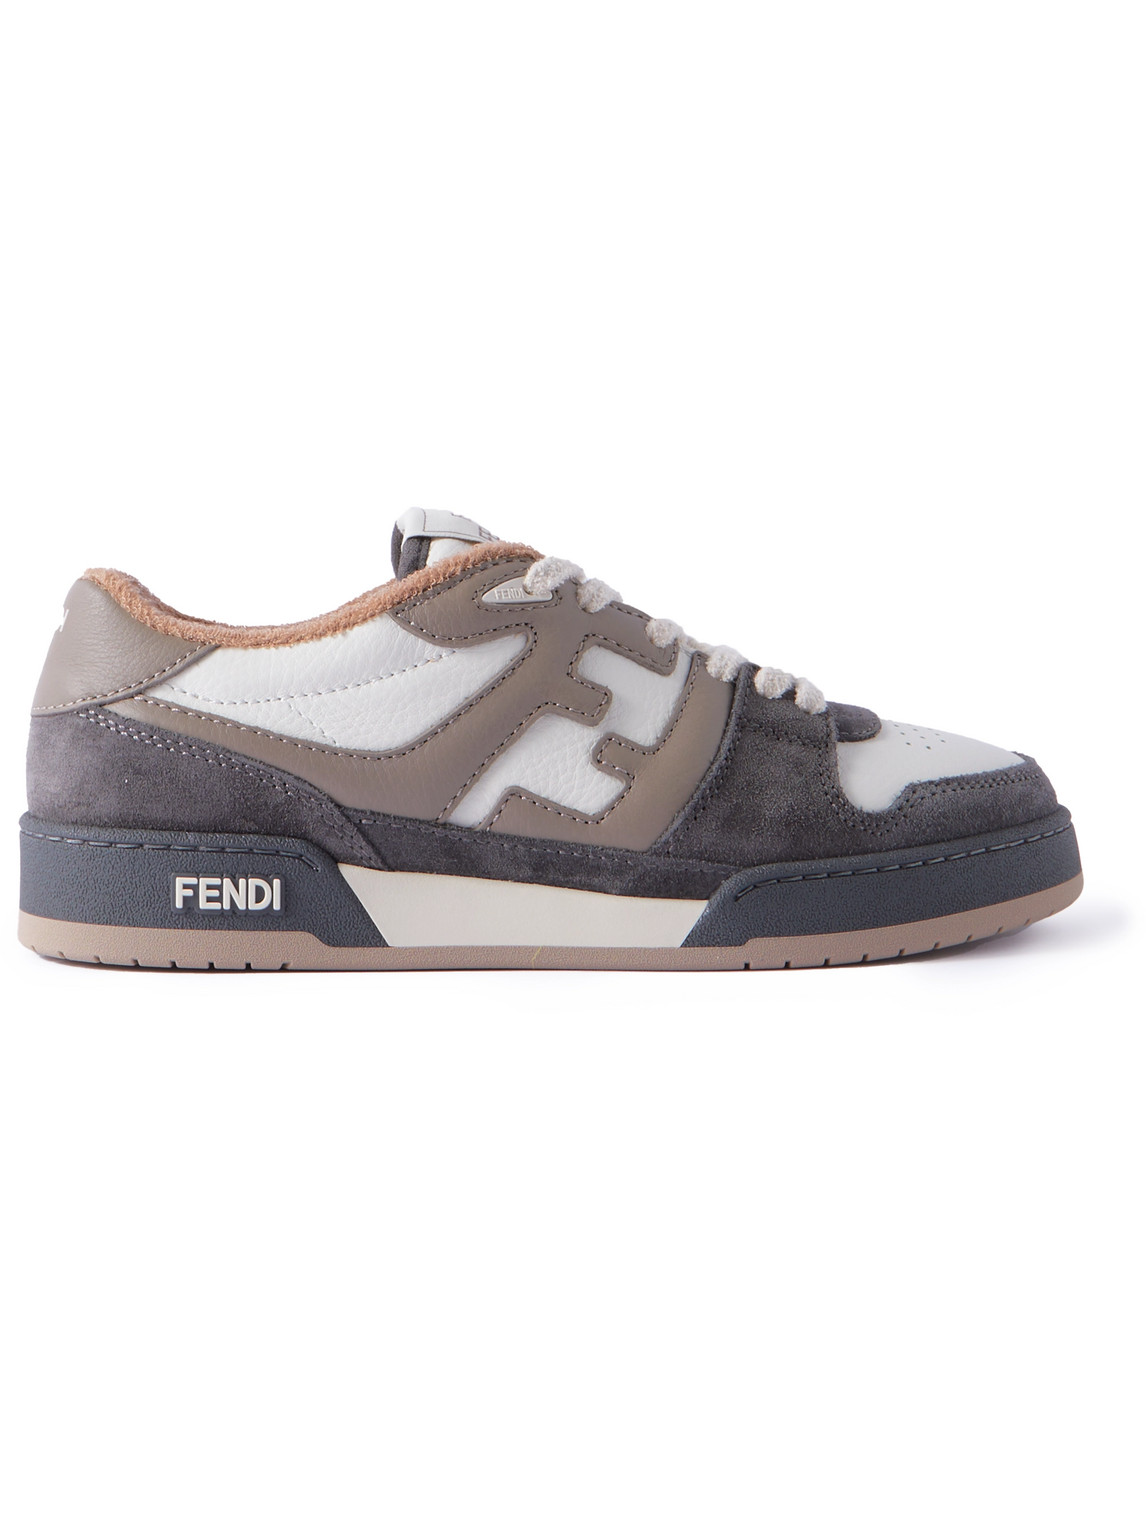 FENDI FENDI MATCH SUEDE-TRIMMED LEATHER SNEAKERS